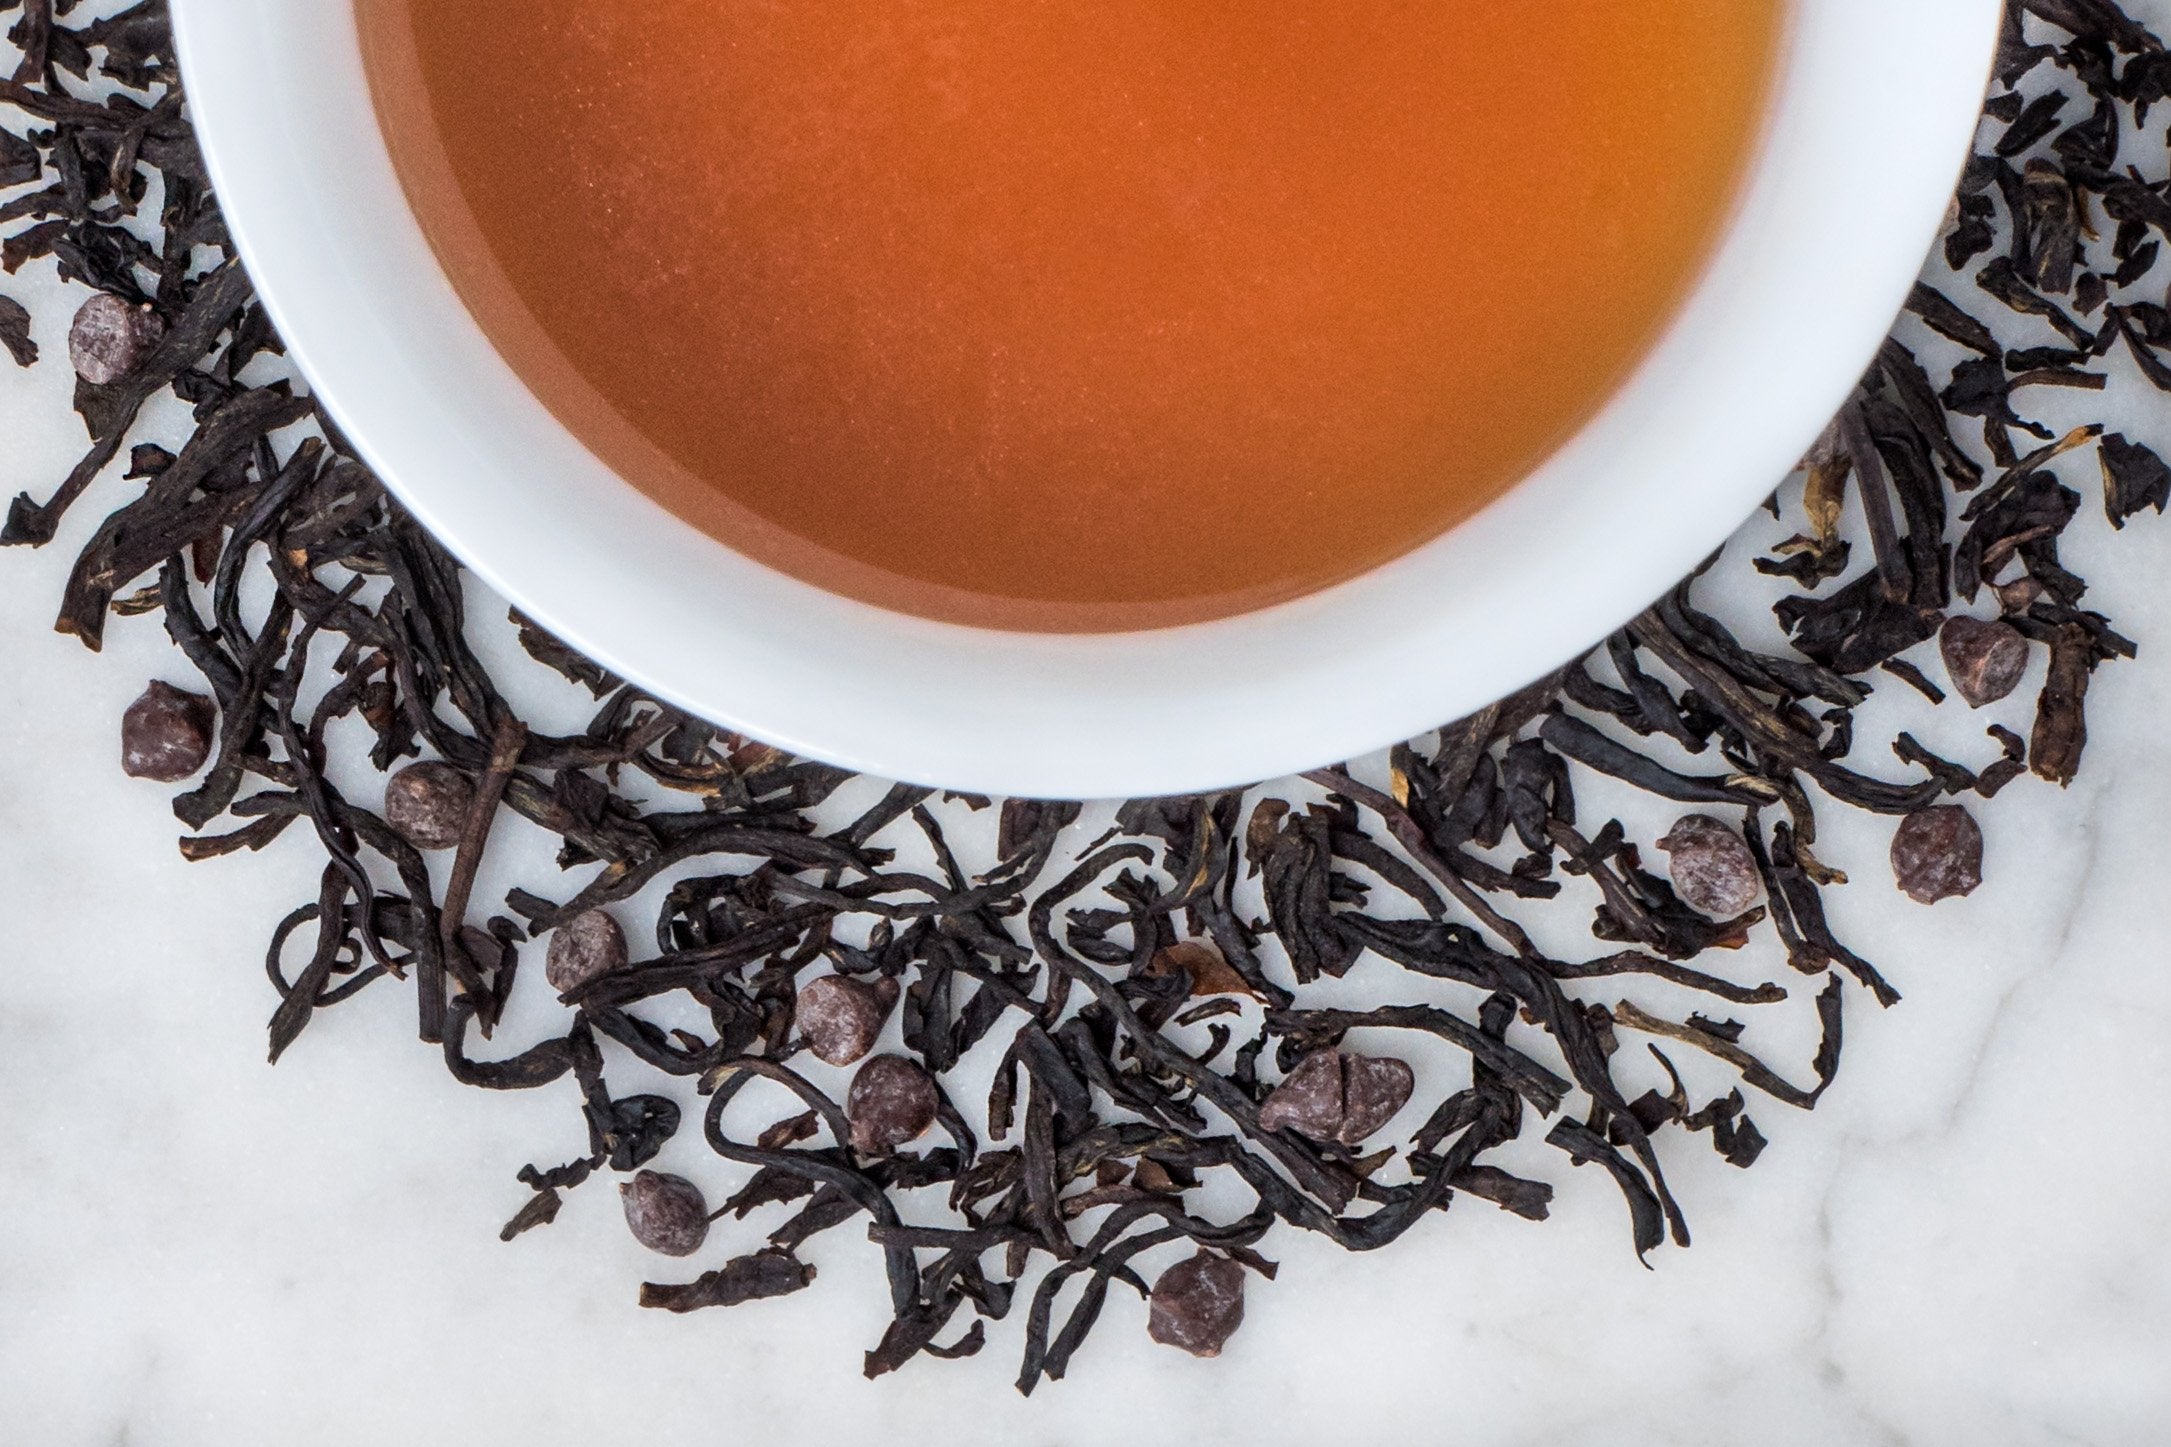 Long Luxurious Black Tea Leaves and Tiny Pieces of Dark French Chocolate Surrounding A Velvety Cup of Vanilla Bean and Chocolate Scented Tea